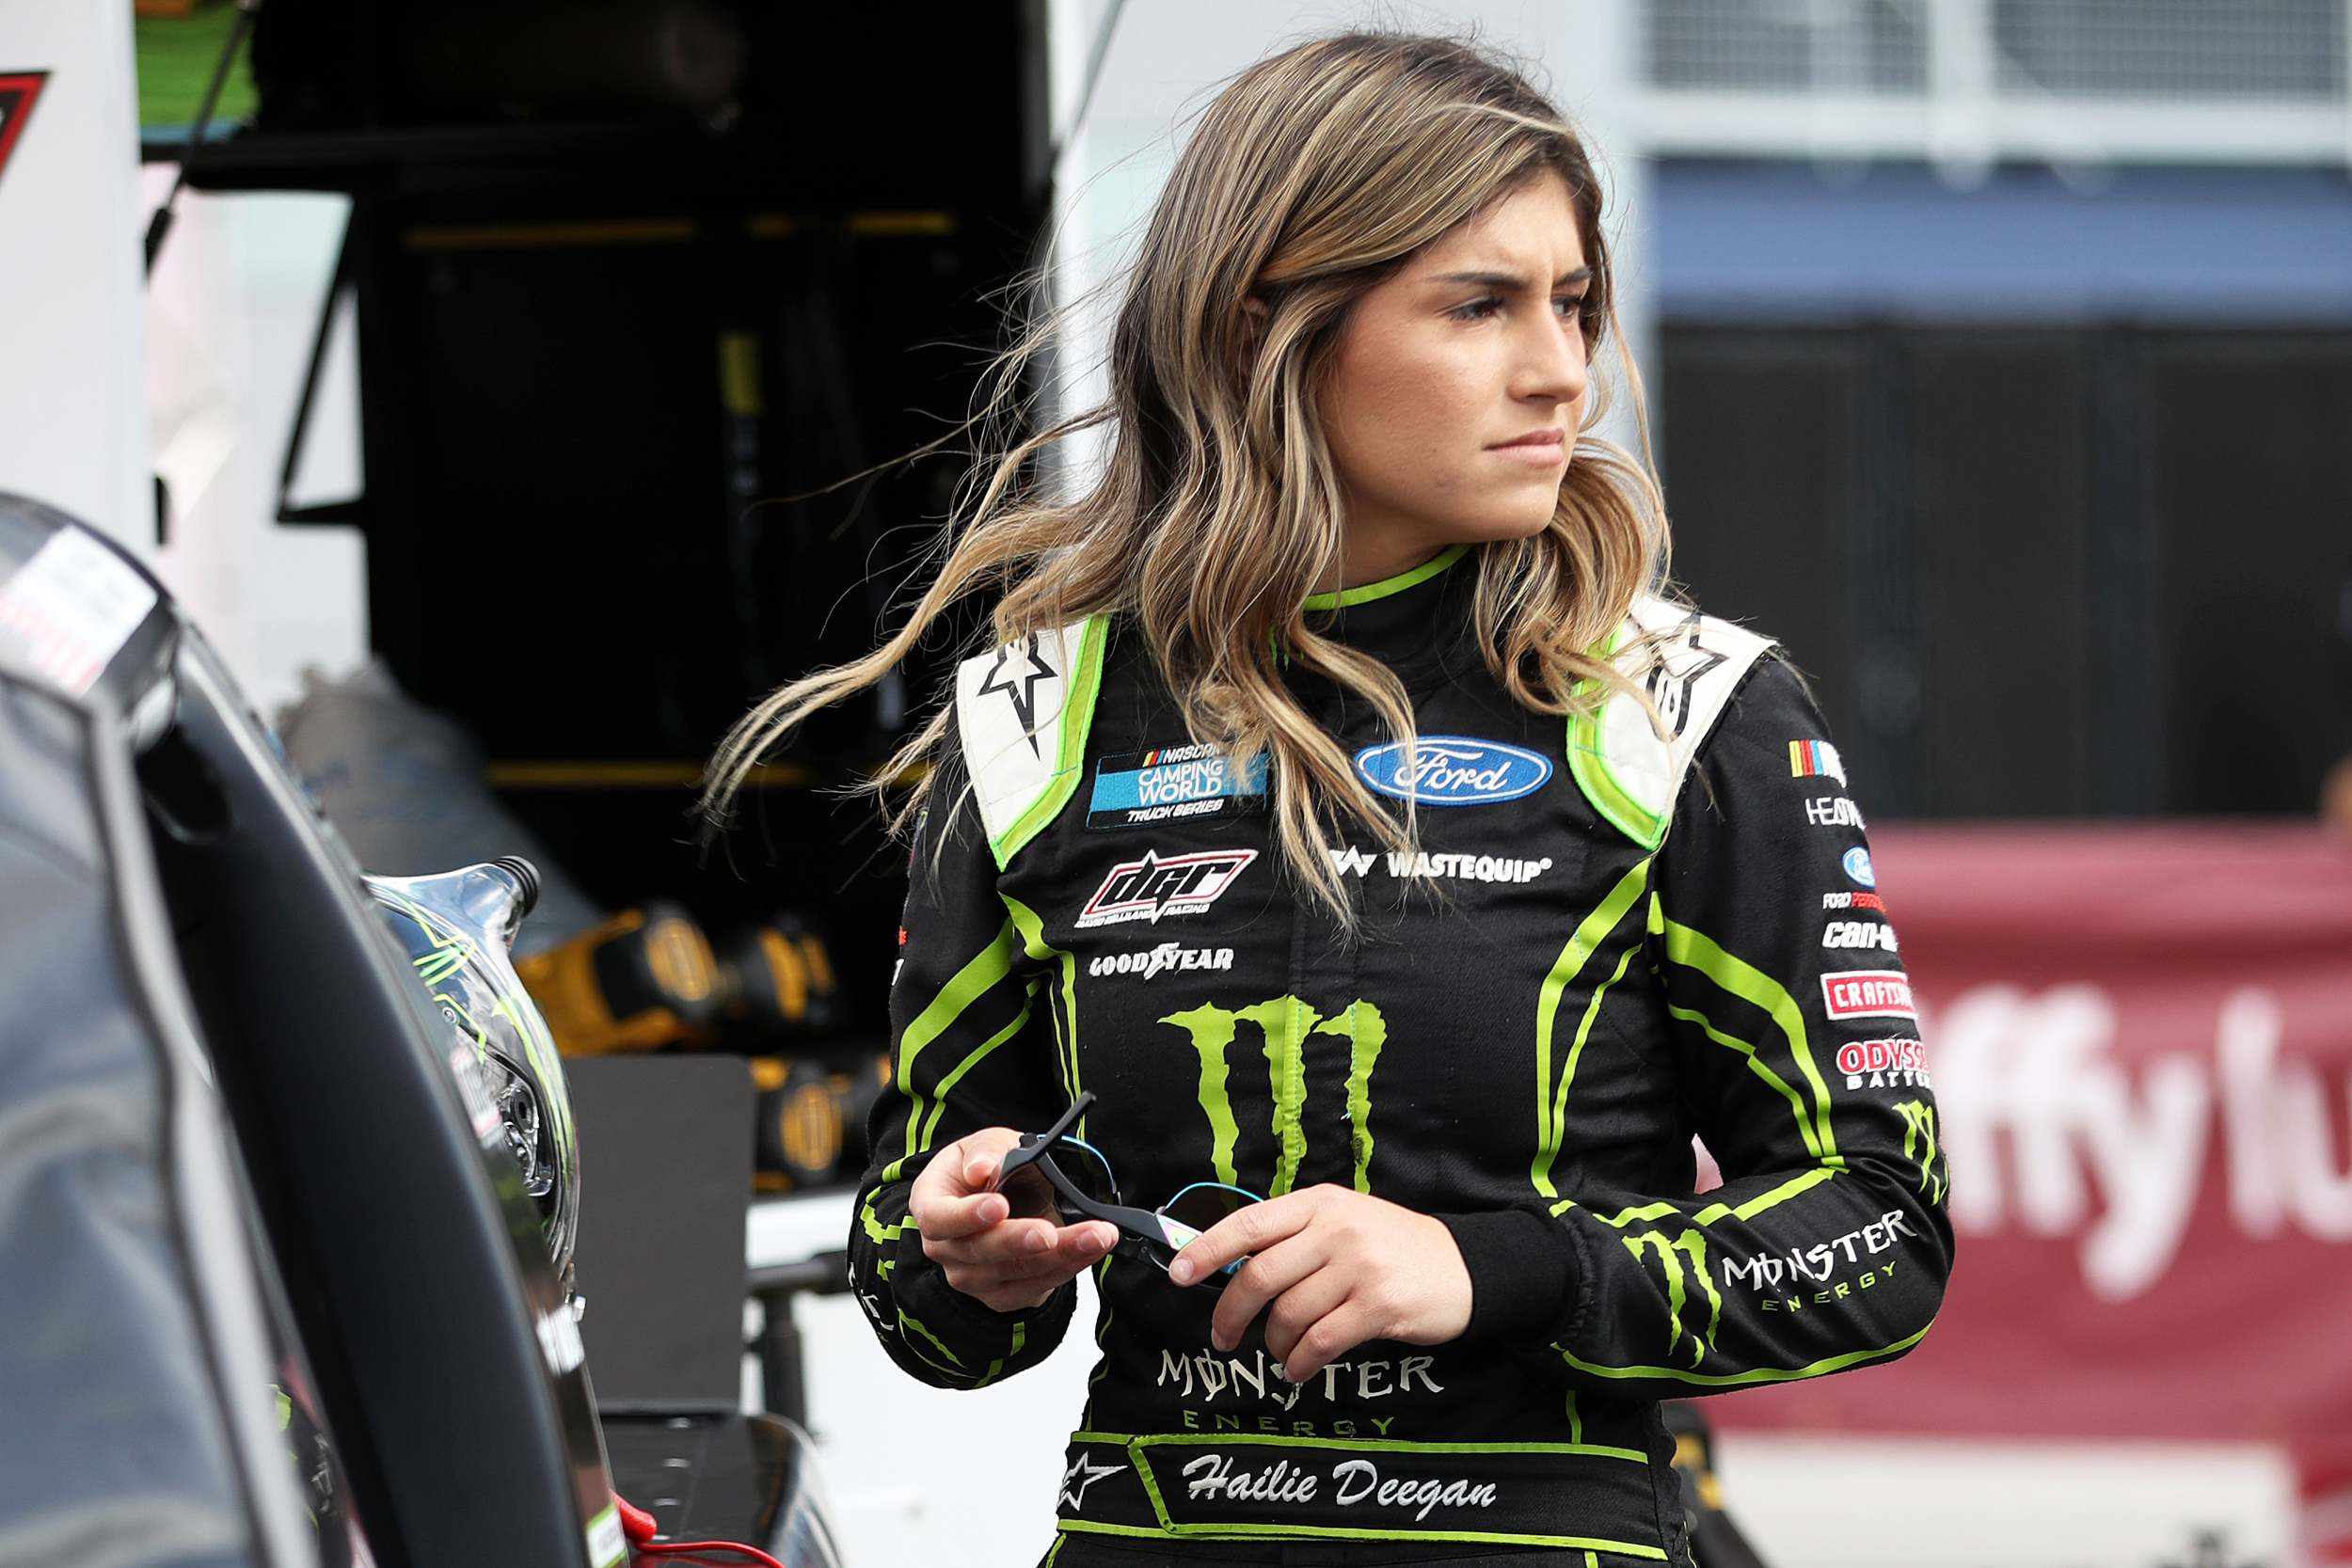 Hailie Deegan wearing her racing attire while holding a black eye glass and standing beside her car